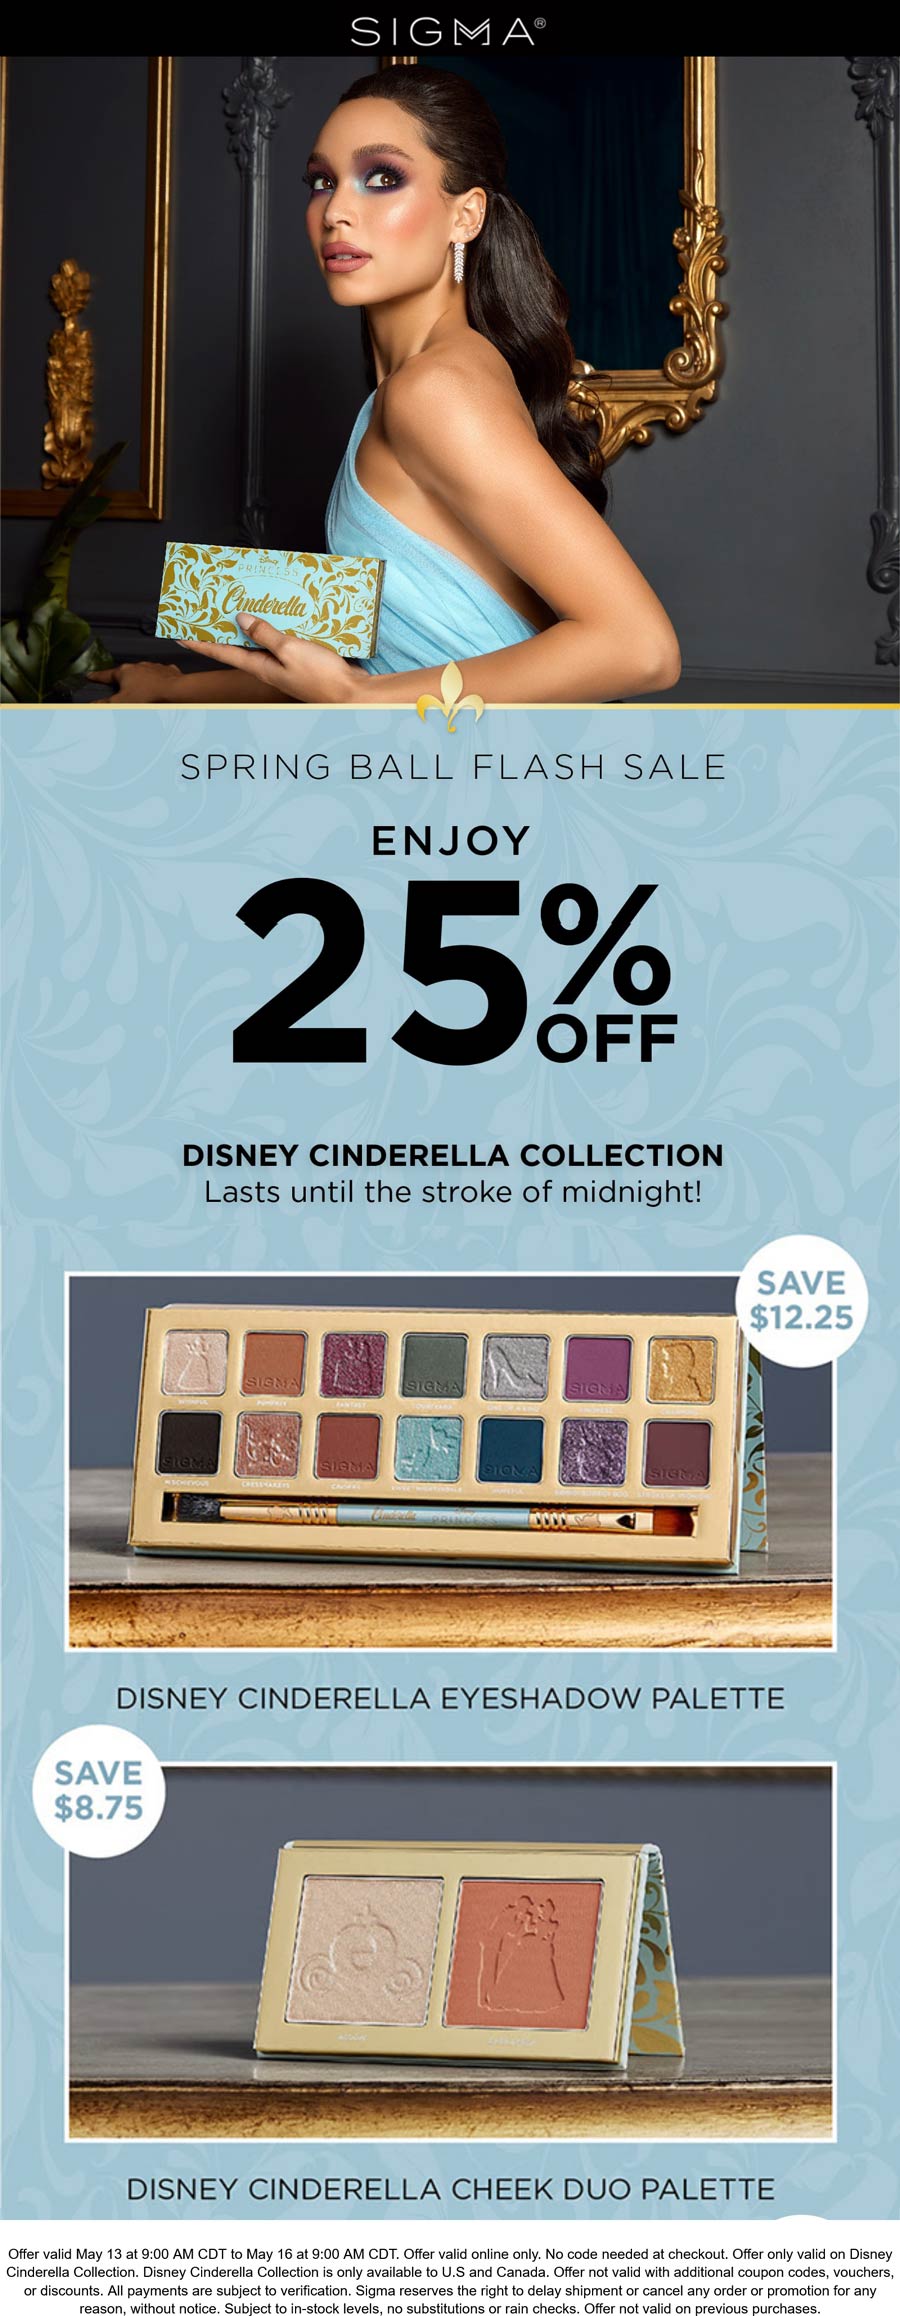 Sigma Beauty stores Coupon  25% off royal looks online at Sigma Beauty #sigmabeauty 